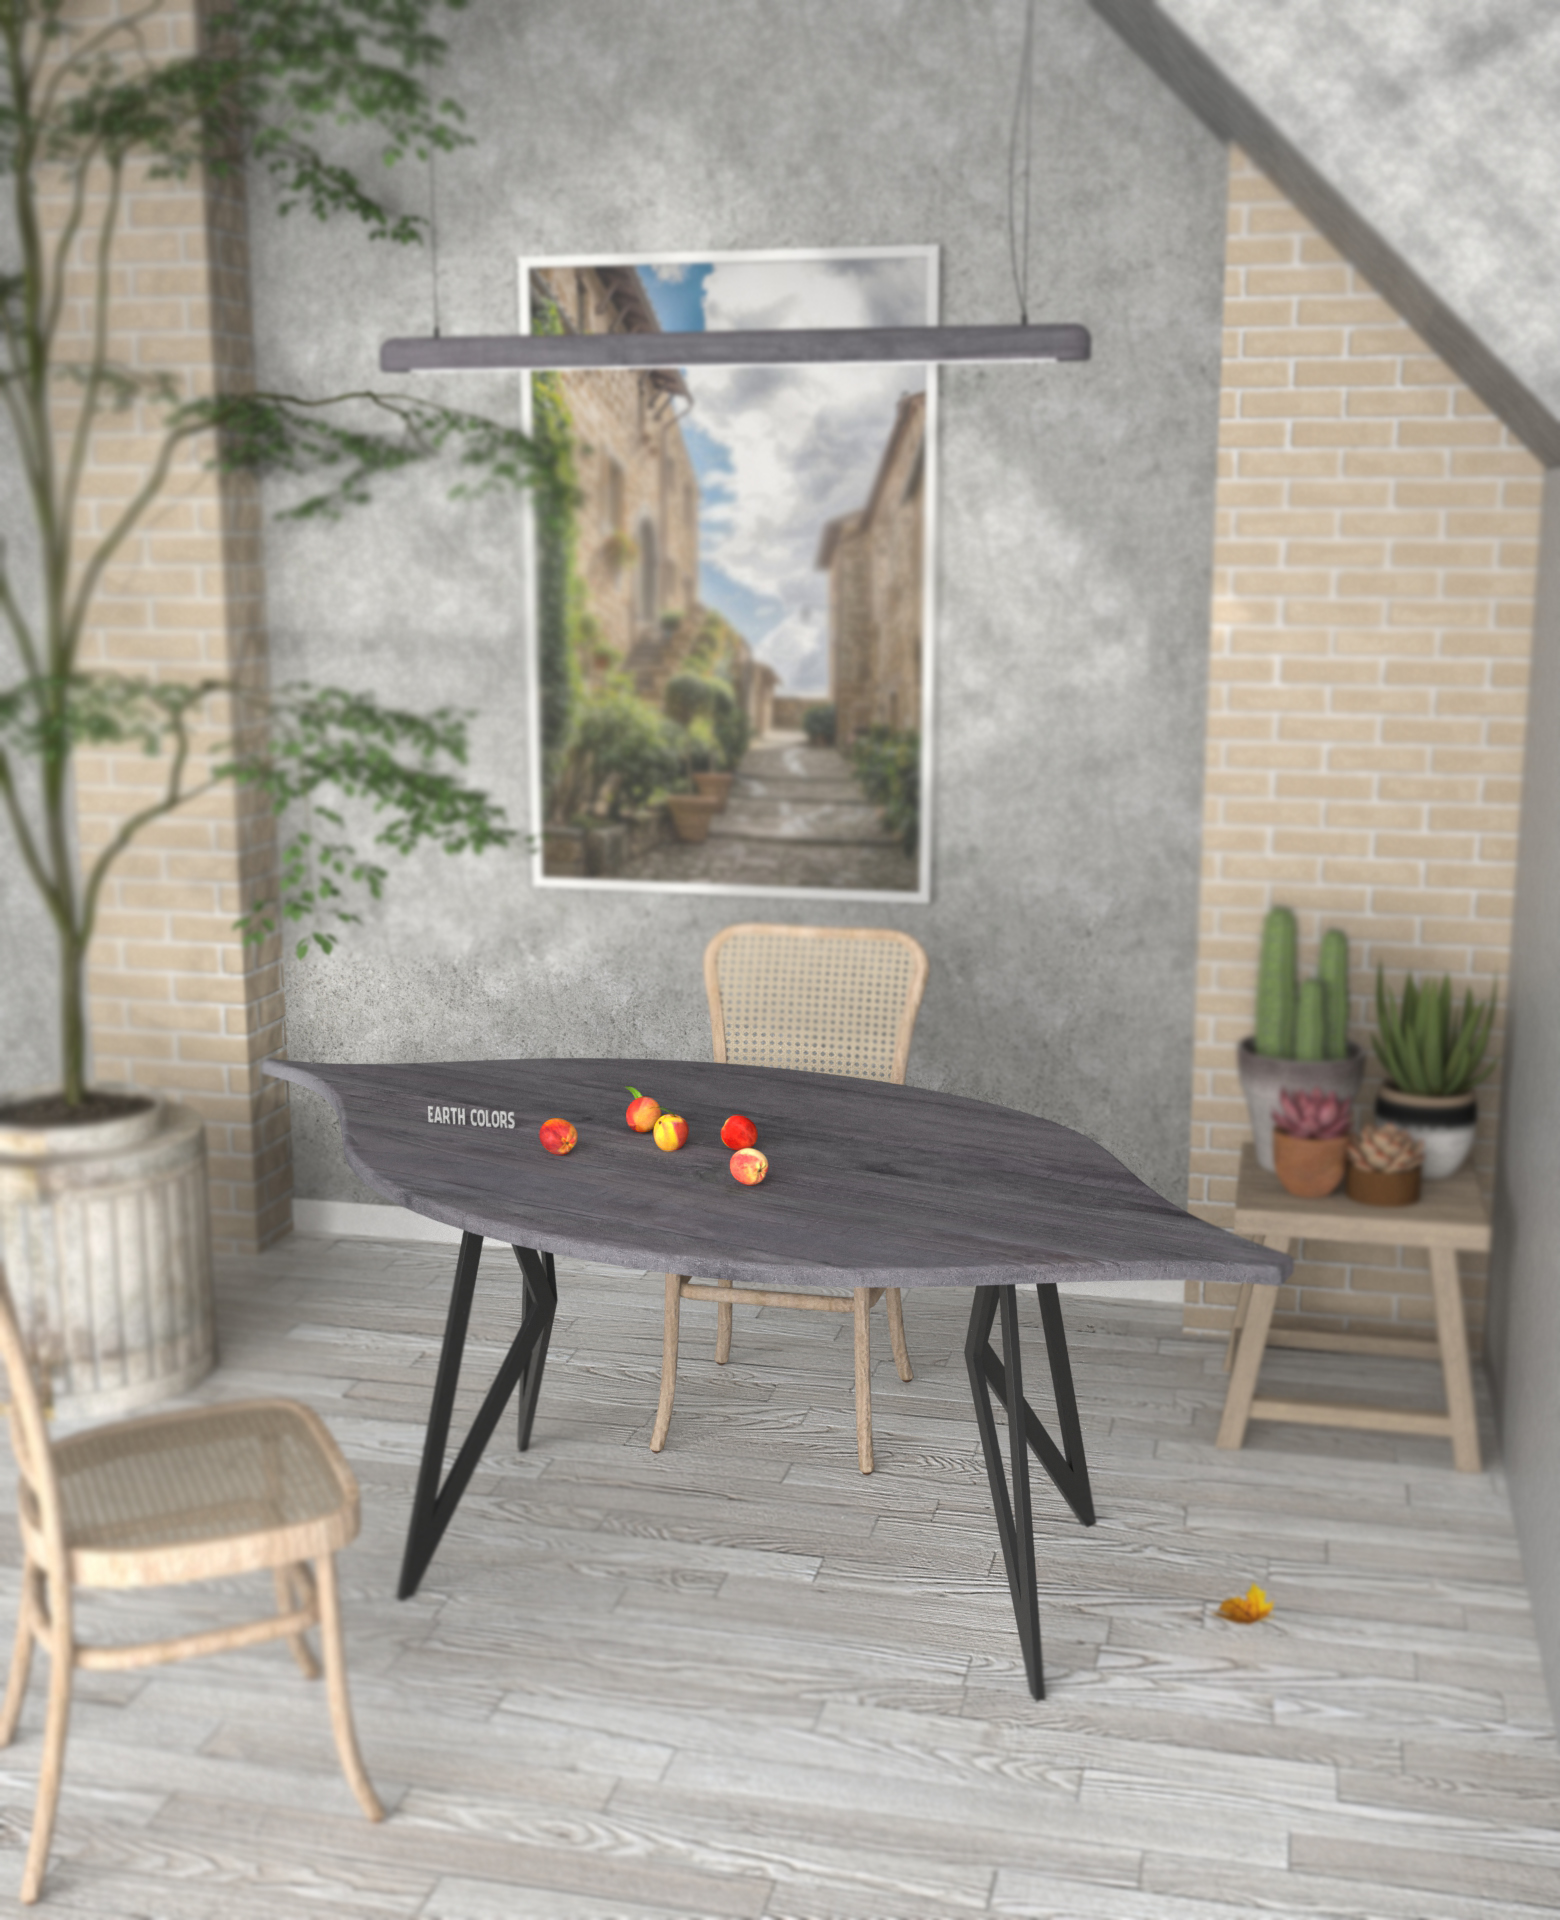 Wooden table painting ideas